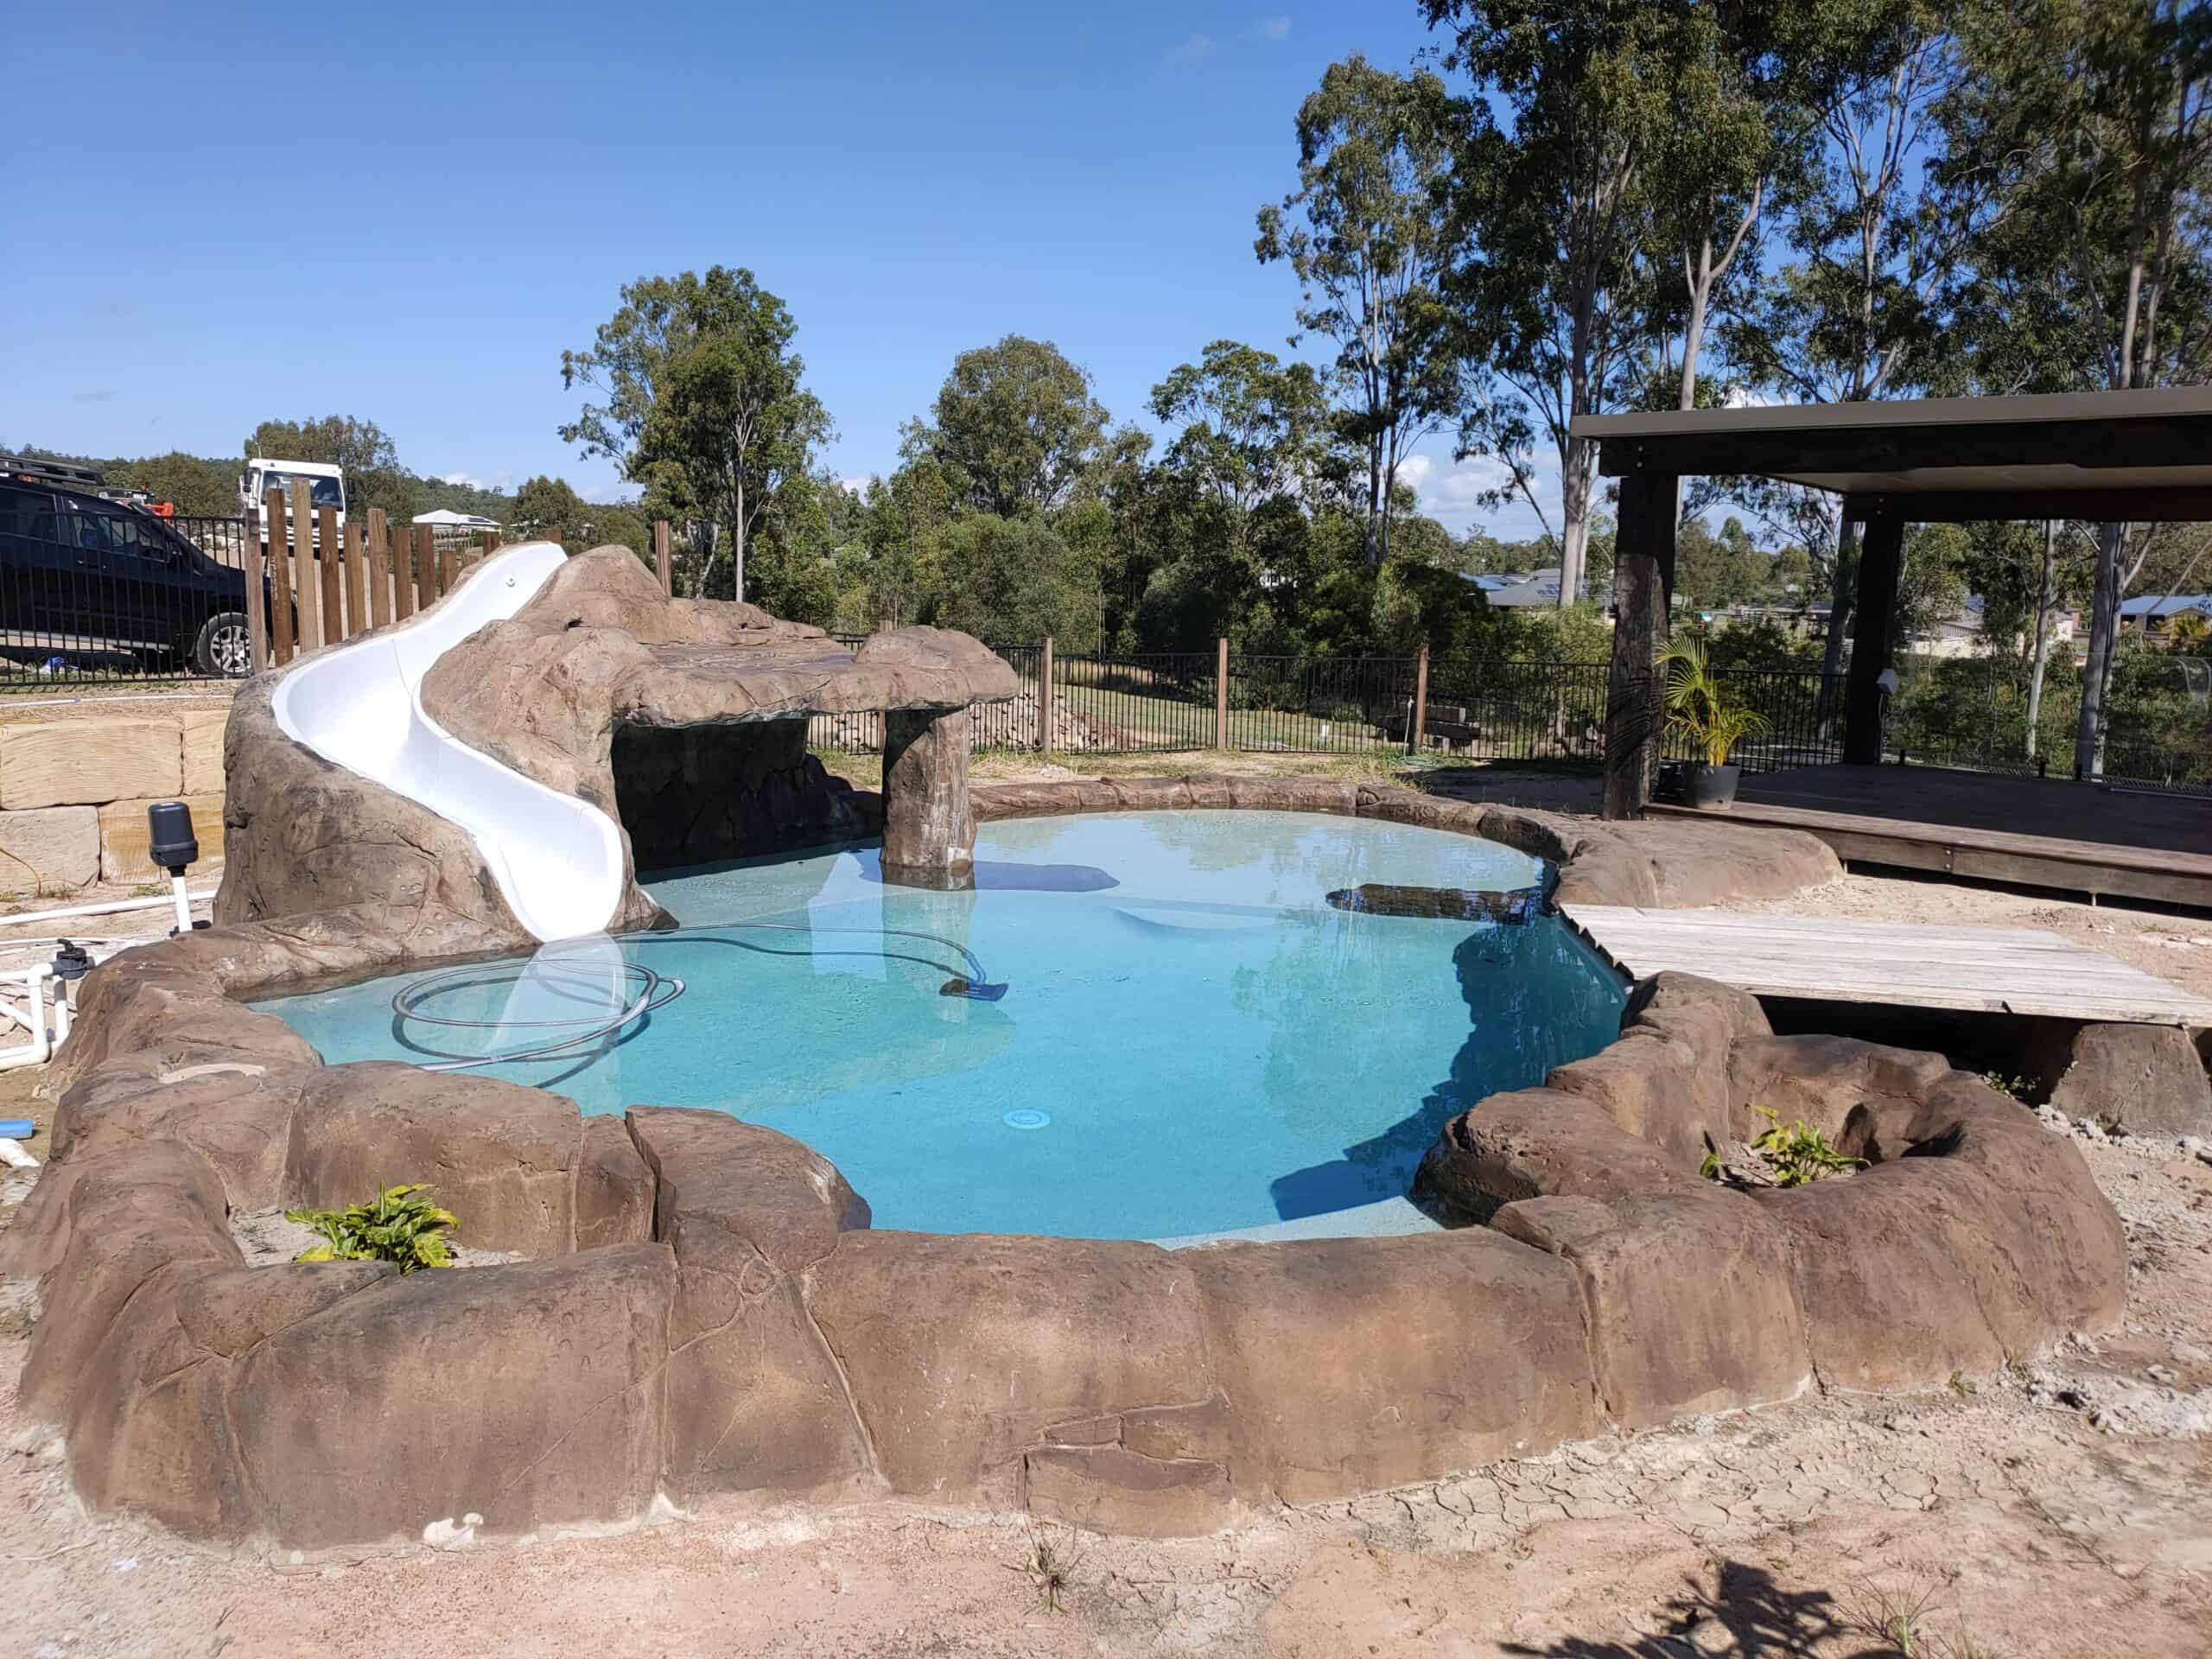 an outdoor swimming pool structure built into a rock structure with a slide